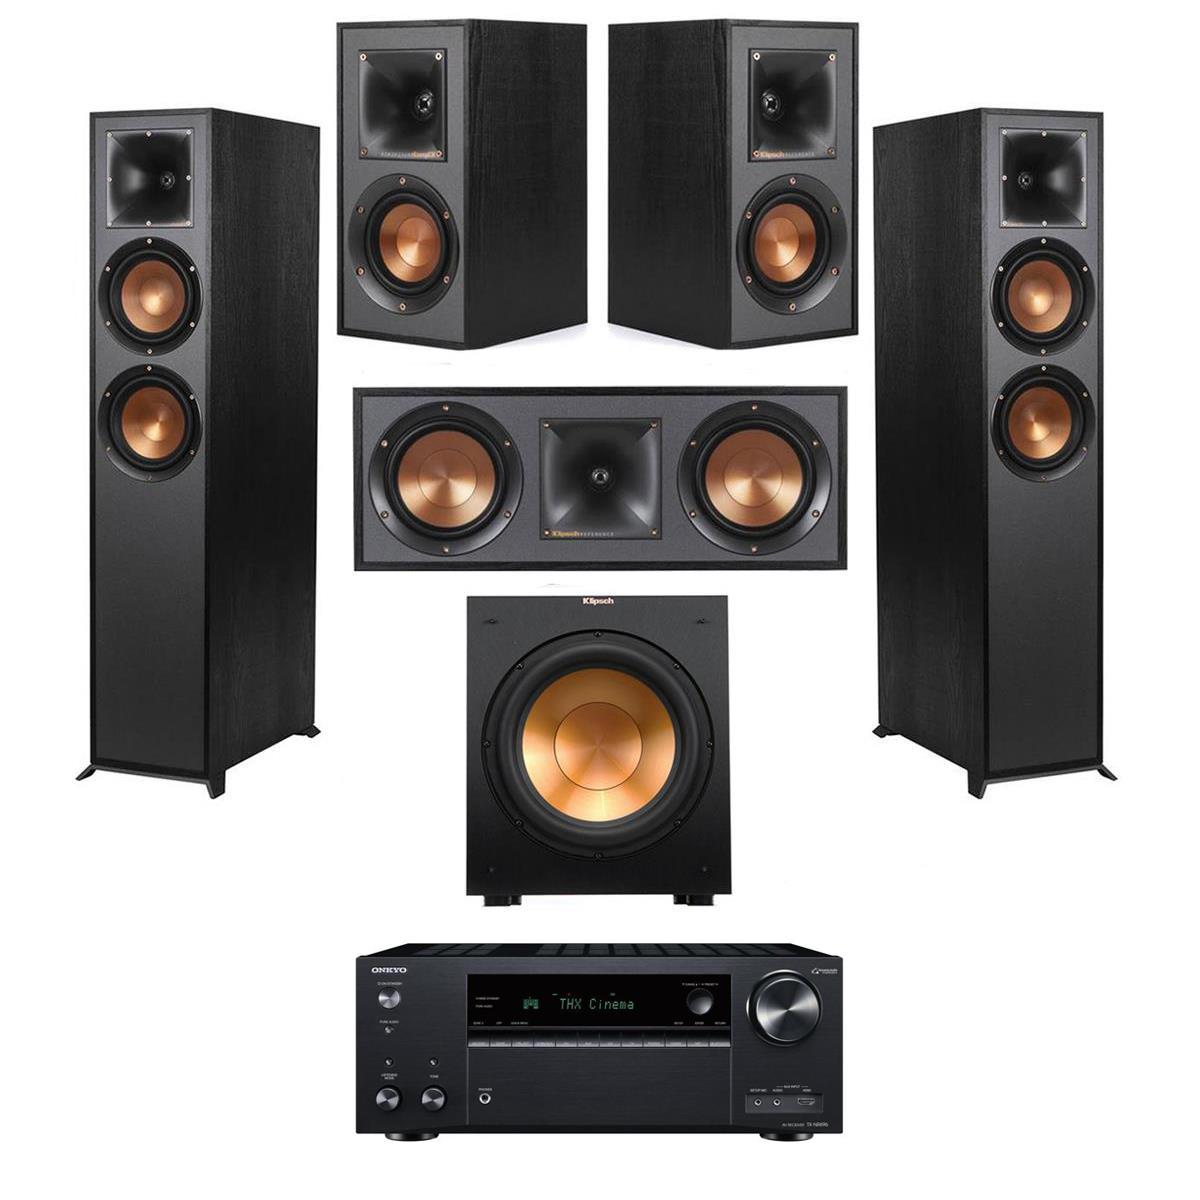 Klipsch Reference 5.1 Home Theater System, Black w/ Denon AVR-S970H 7.2 Receiver -  1065841 A5